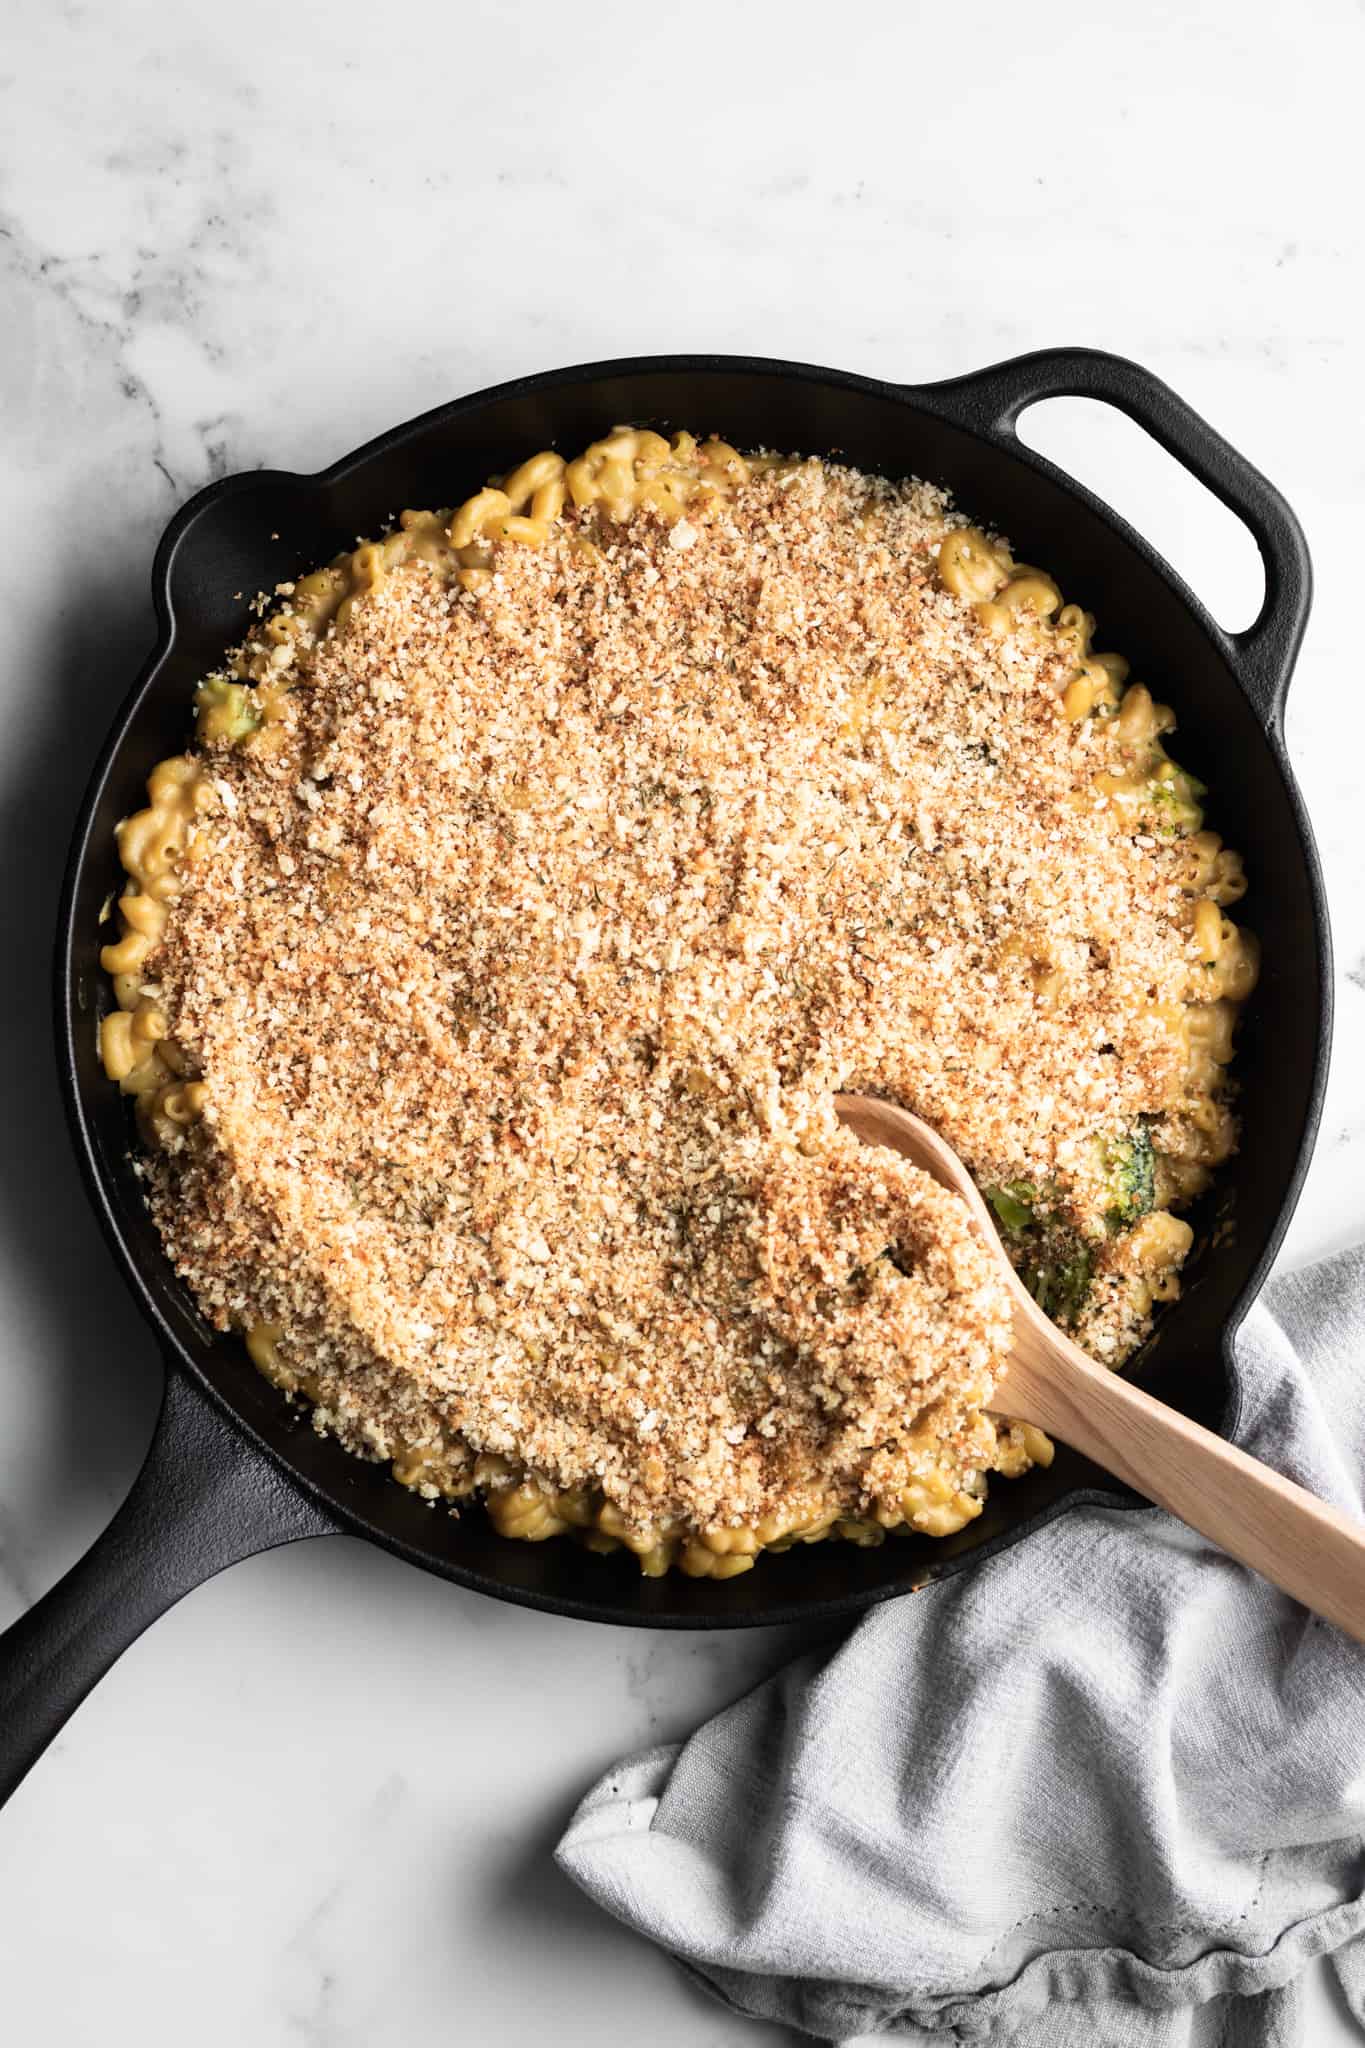 Simple Baked Vegan Mac and Cheese